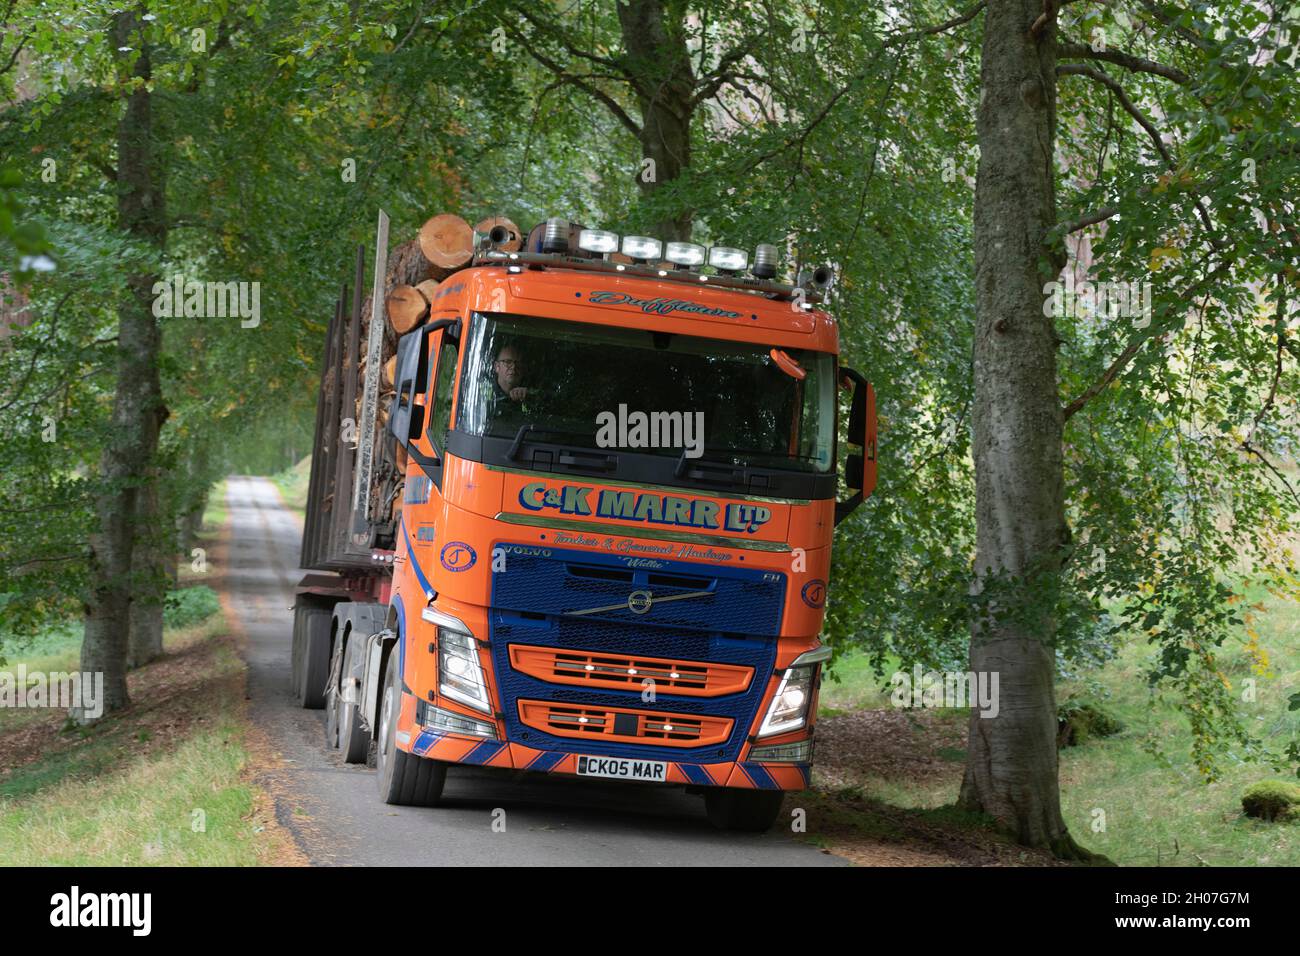 A C & K Marr Ltd Lorry Transporting Logs Along a Single Track Road Through a Forest on the Invercauld Estate in the Cairngorms National Park Stock Photo